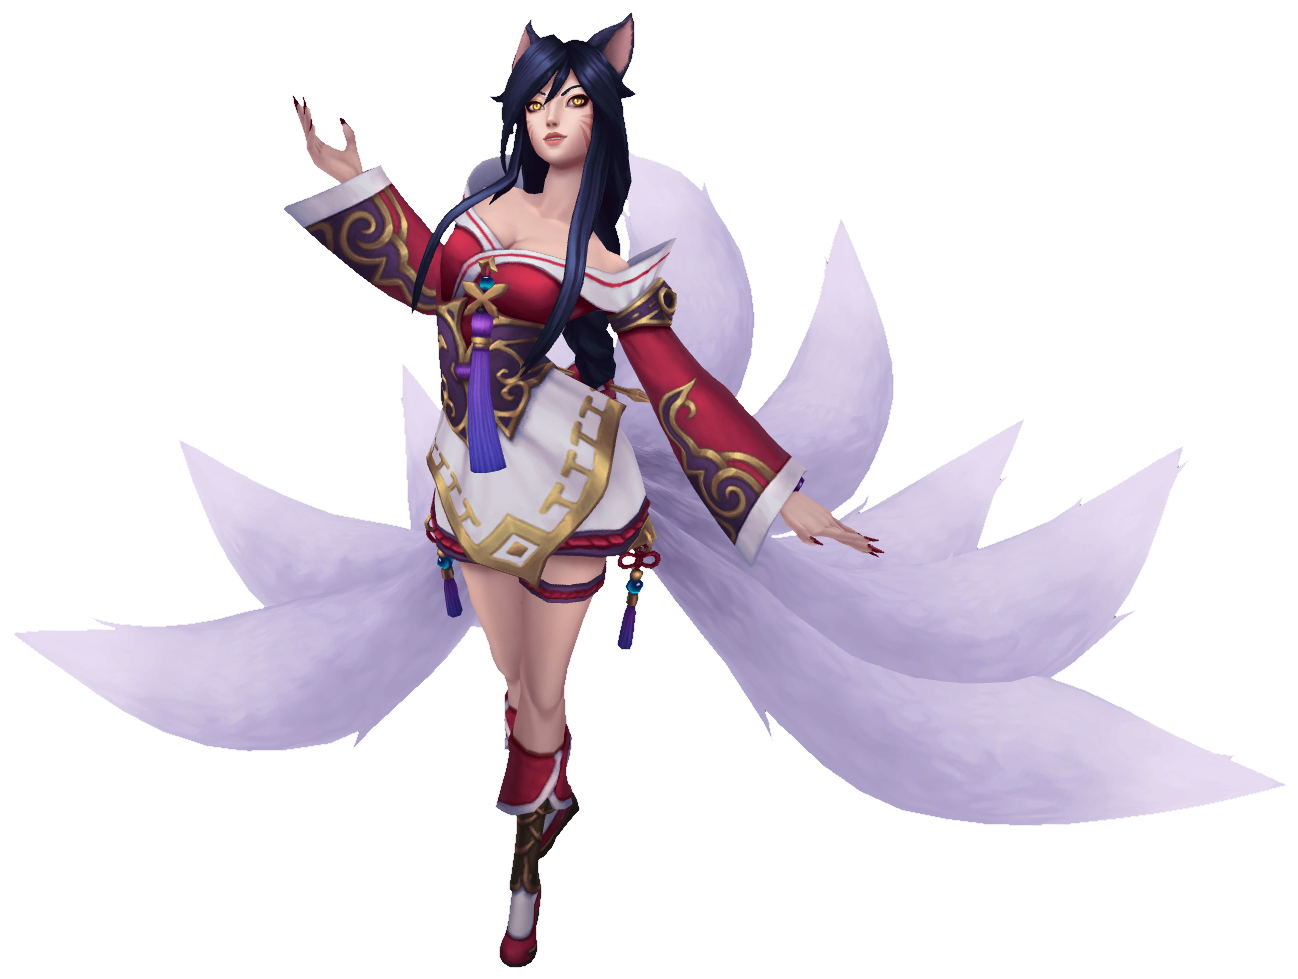 Ahri is a playable character in the popular online game League of Legends. She is known for her blonde hair and seductive charm.
2. Ahri - Champions - Universe of League of Legends - wide 4